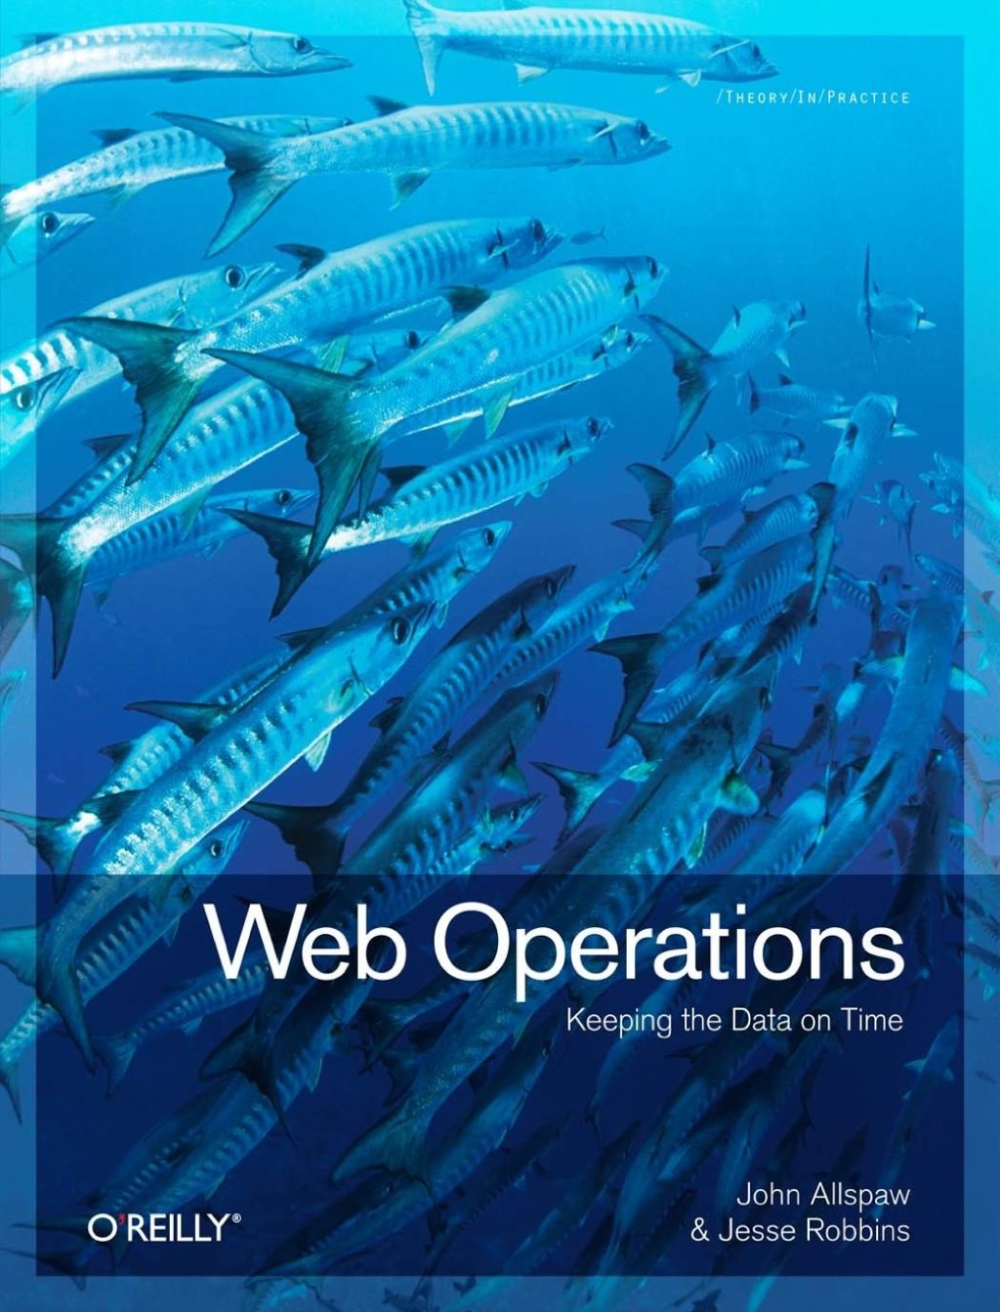 Web Operations cover features a battery of barracuda in a deep turquoise and blue ocean